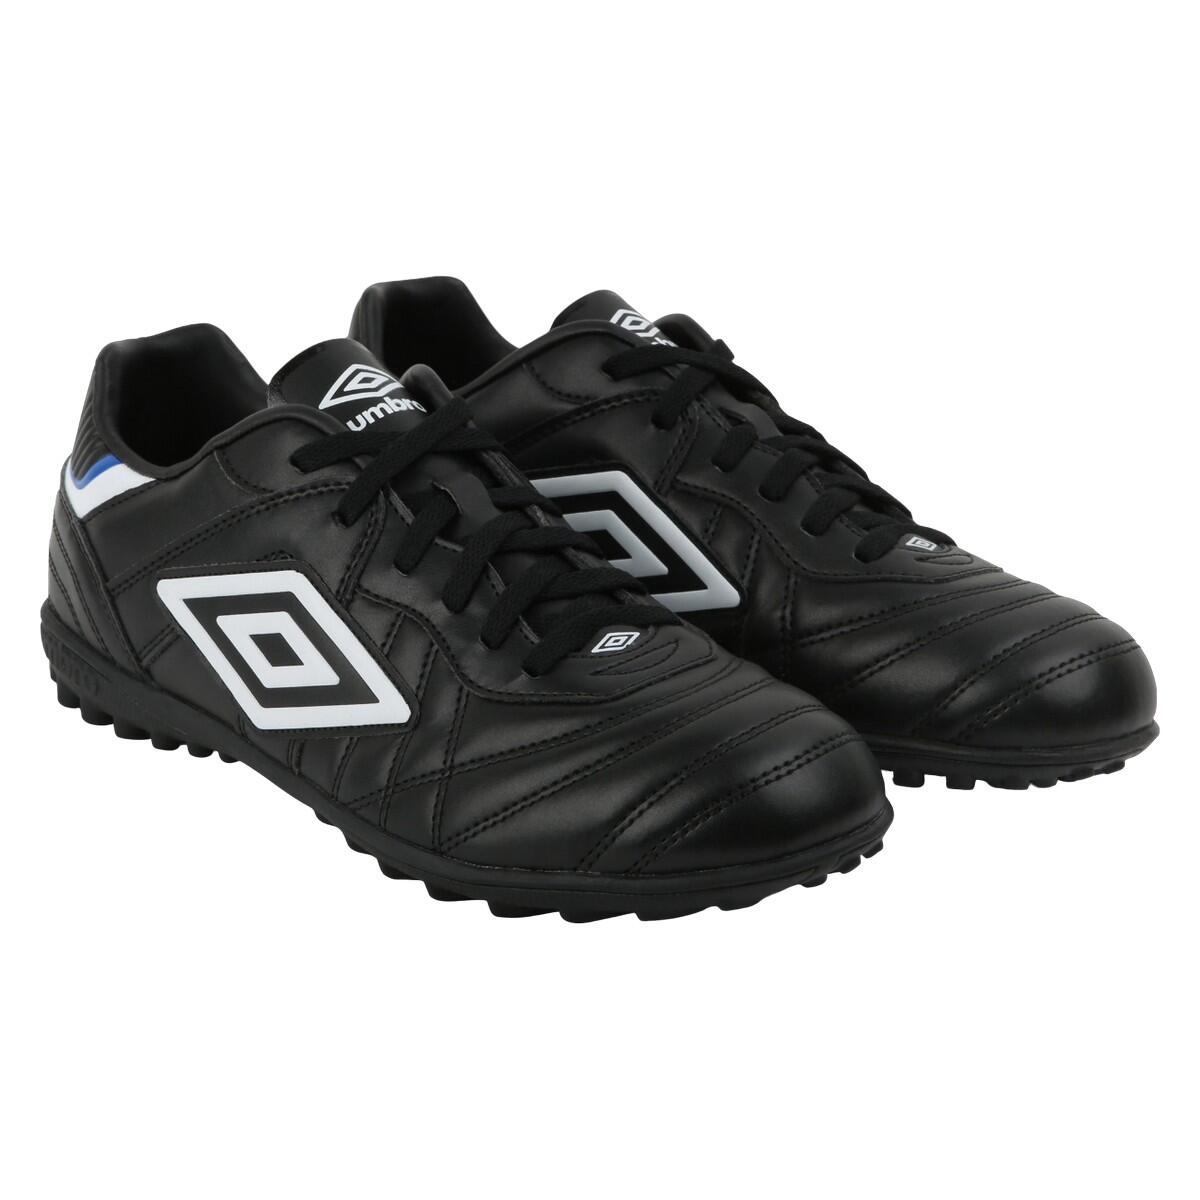 UMBRO Mens Speciali Eternal Club Tf Leather Football Boots (Black/White/Royal Blue)